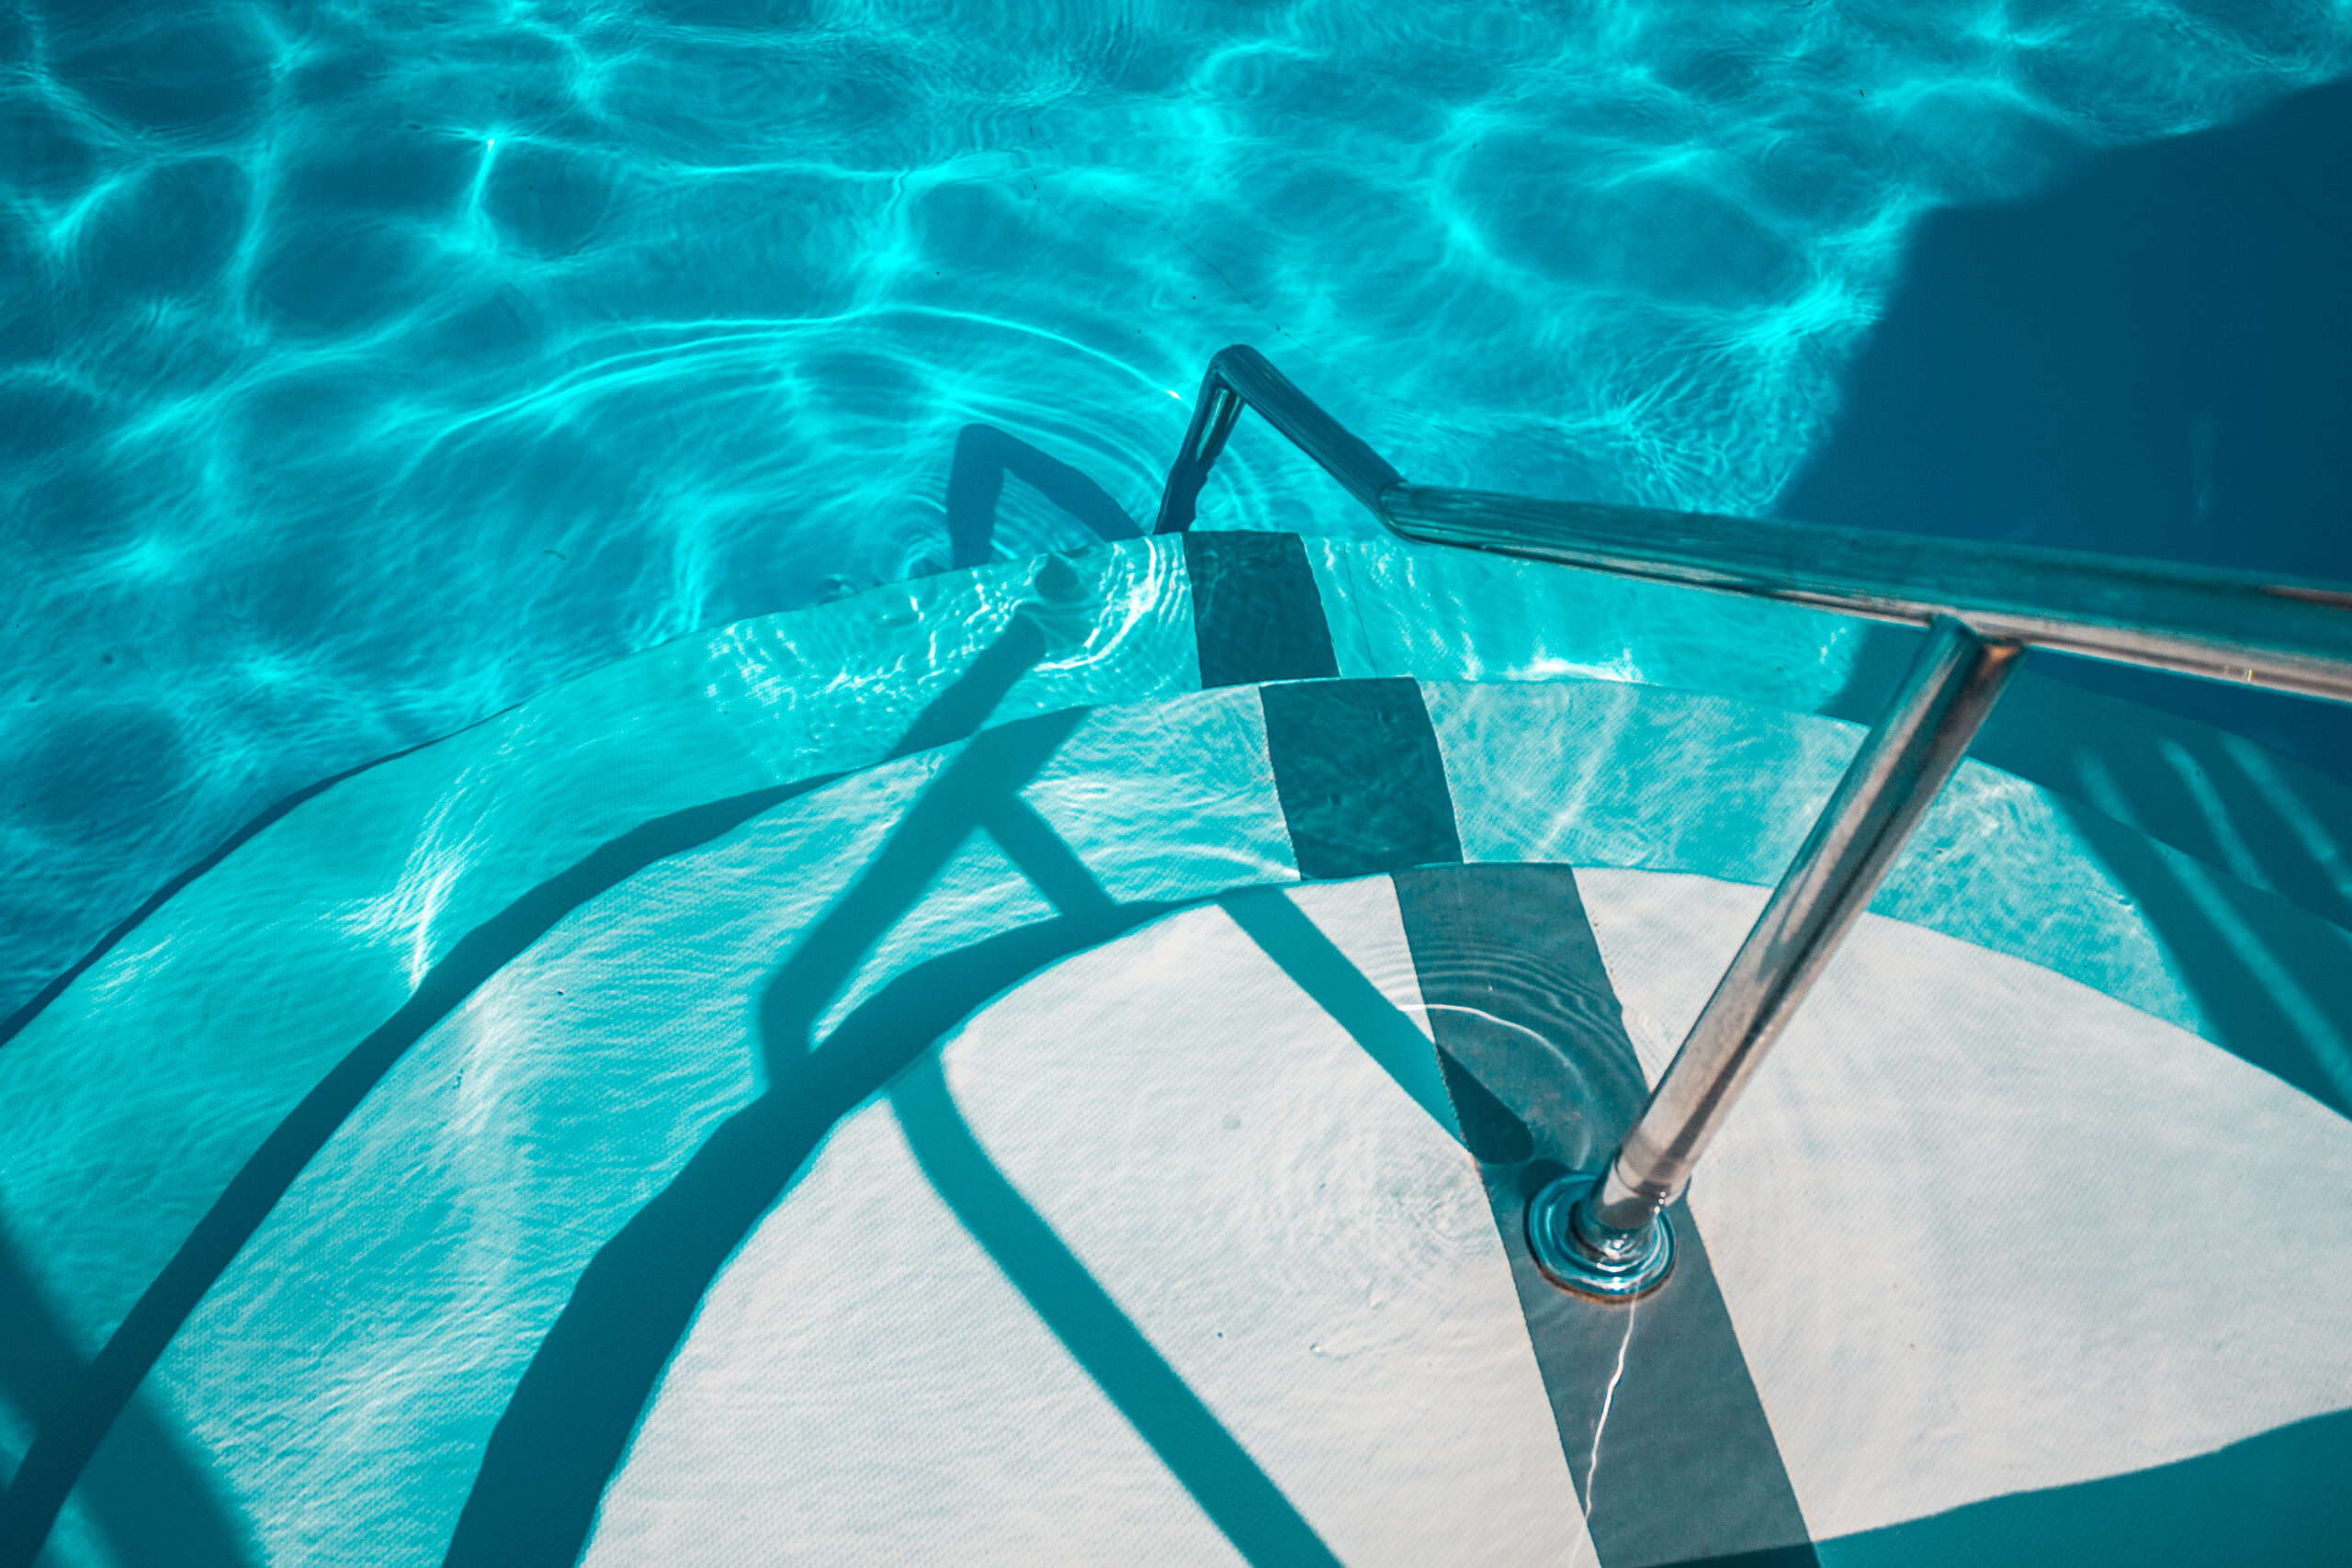 Handrails by the poolside, providing support and safety for swimmers and pool users.